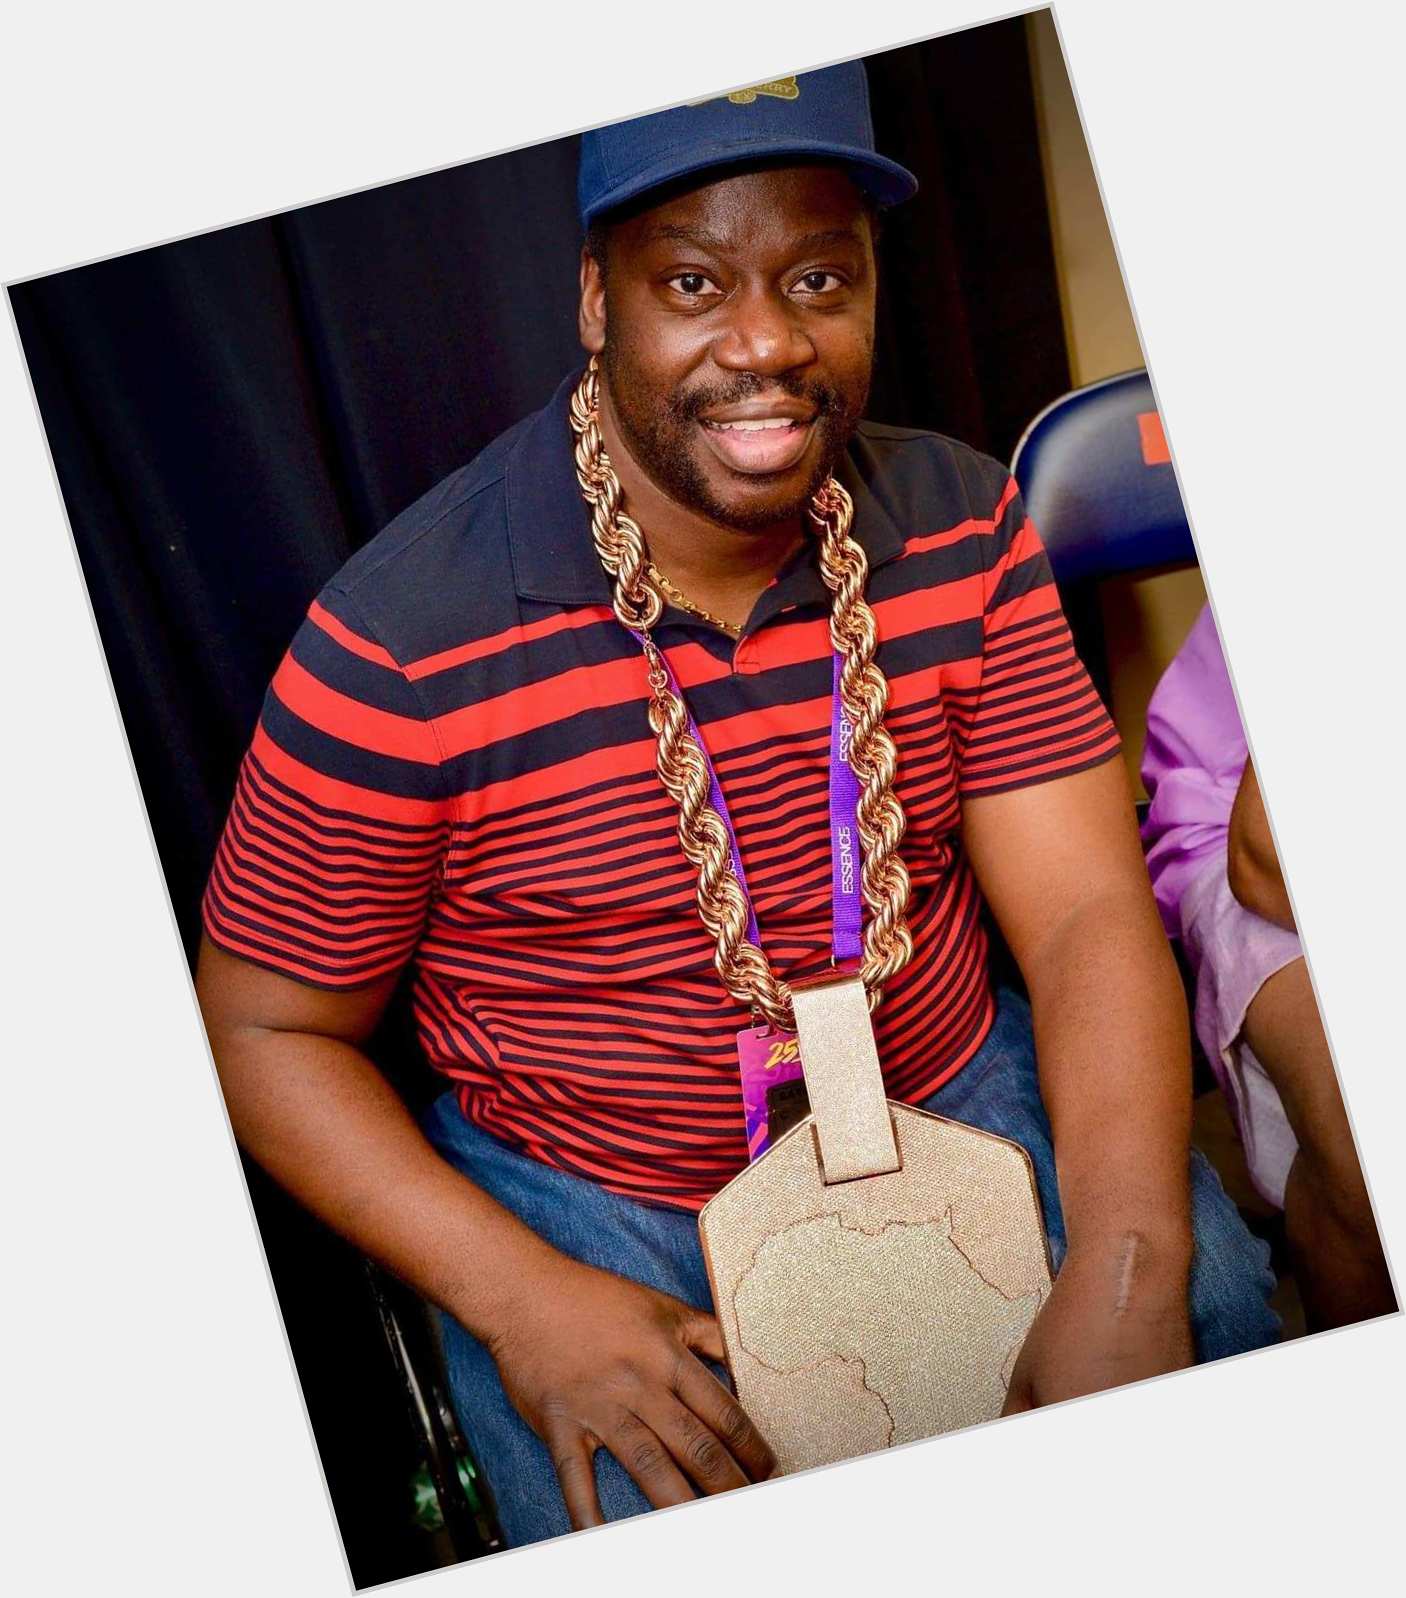 <a href="/hot-men/daryl-mitchell/is-he-really-wheelchair-paralyzed-tall">Daryl Mitchell</a>  